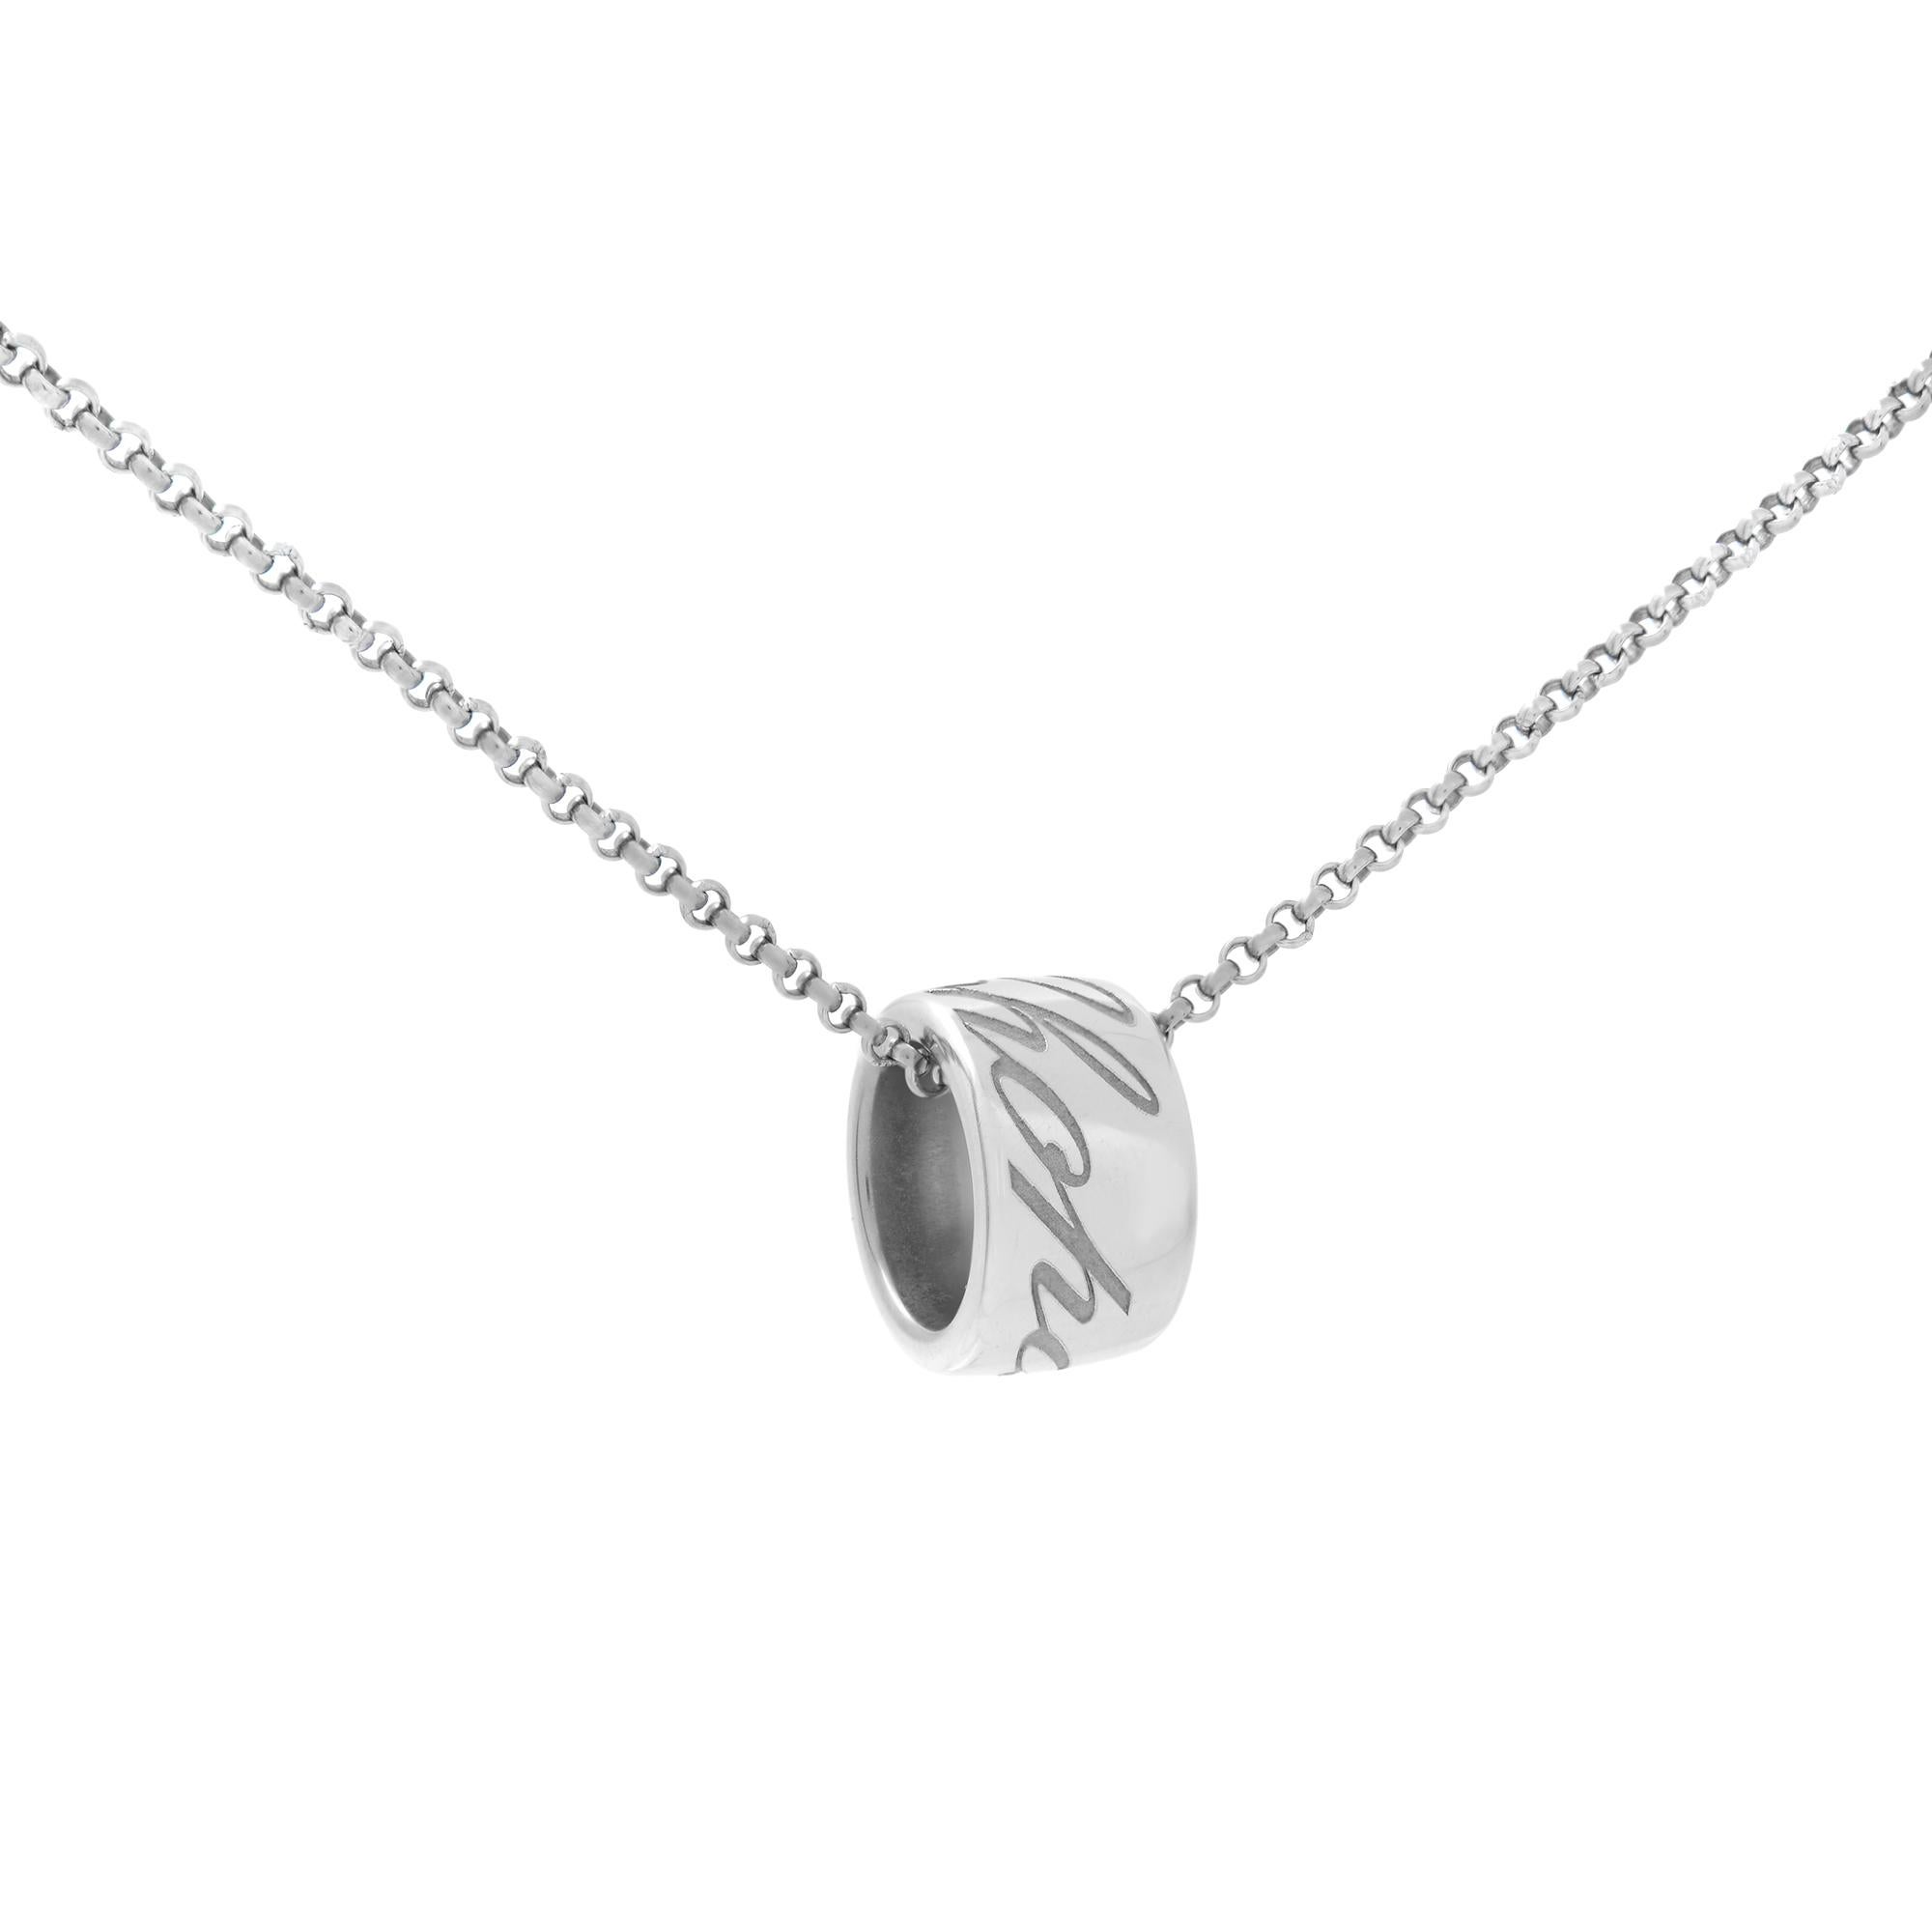 This necklace is crafted of 18k white gold and features a wide 18k white gold slide pendant engraved with the Chopard logo in elegant script. Pendant: 12 mm. Chain: 16.5 inches. Great pre-owned condition. Original box and papers are not included. 